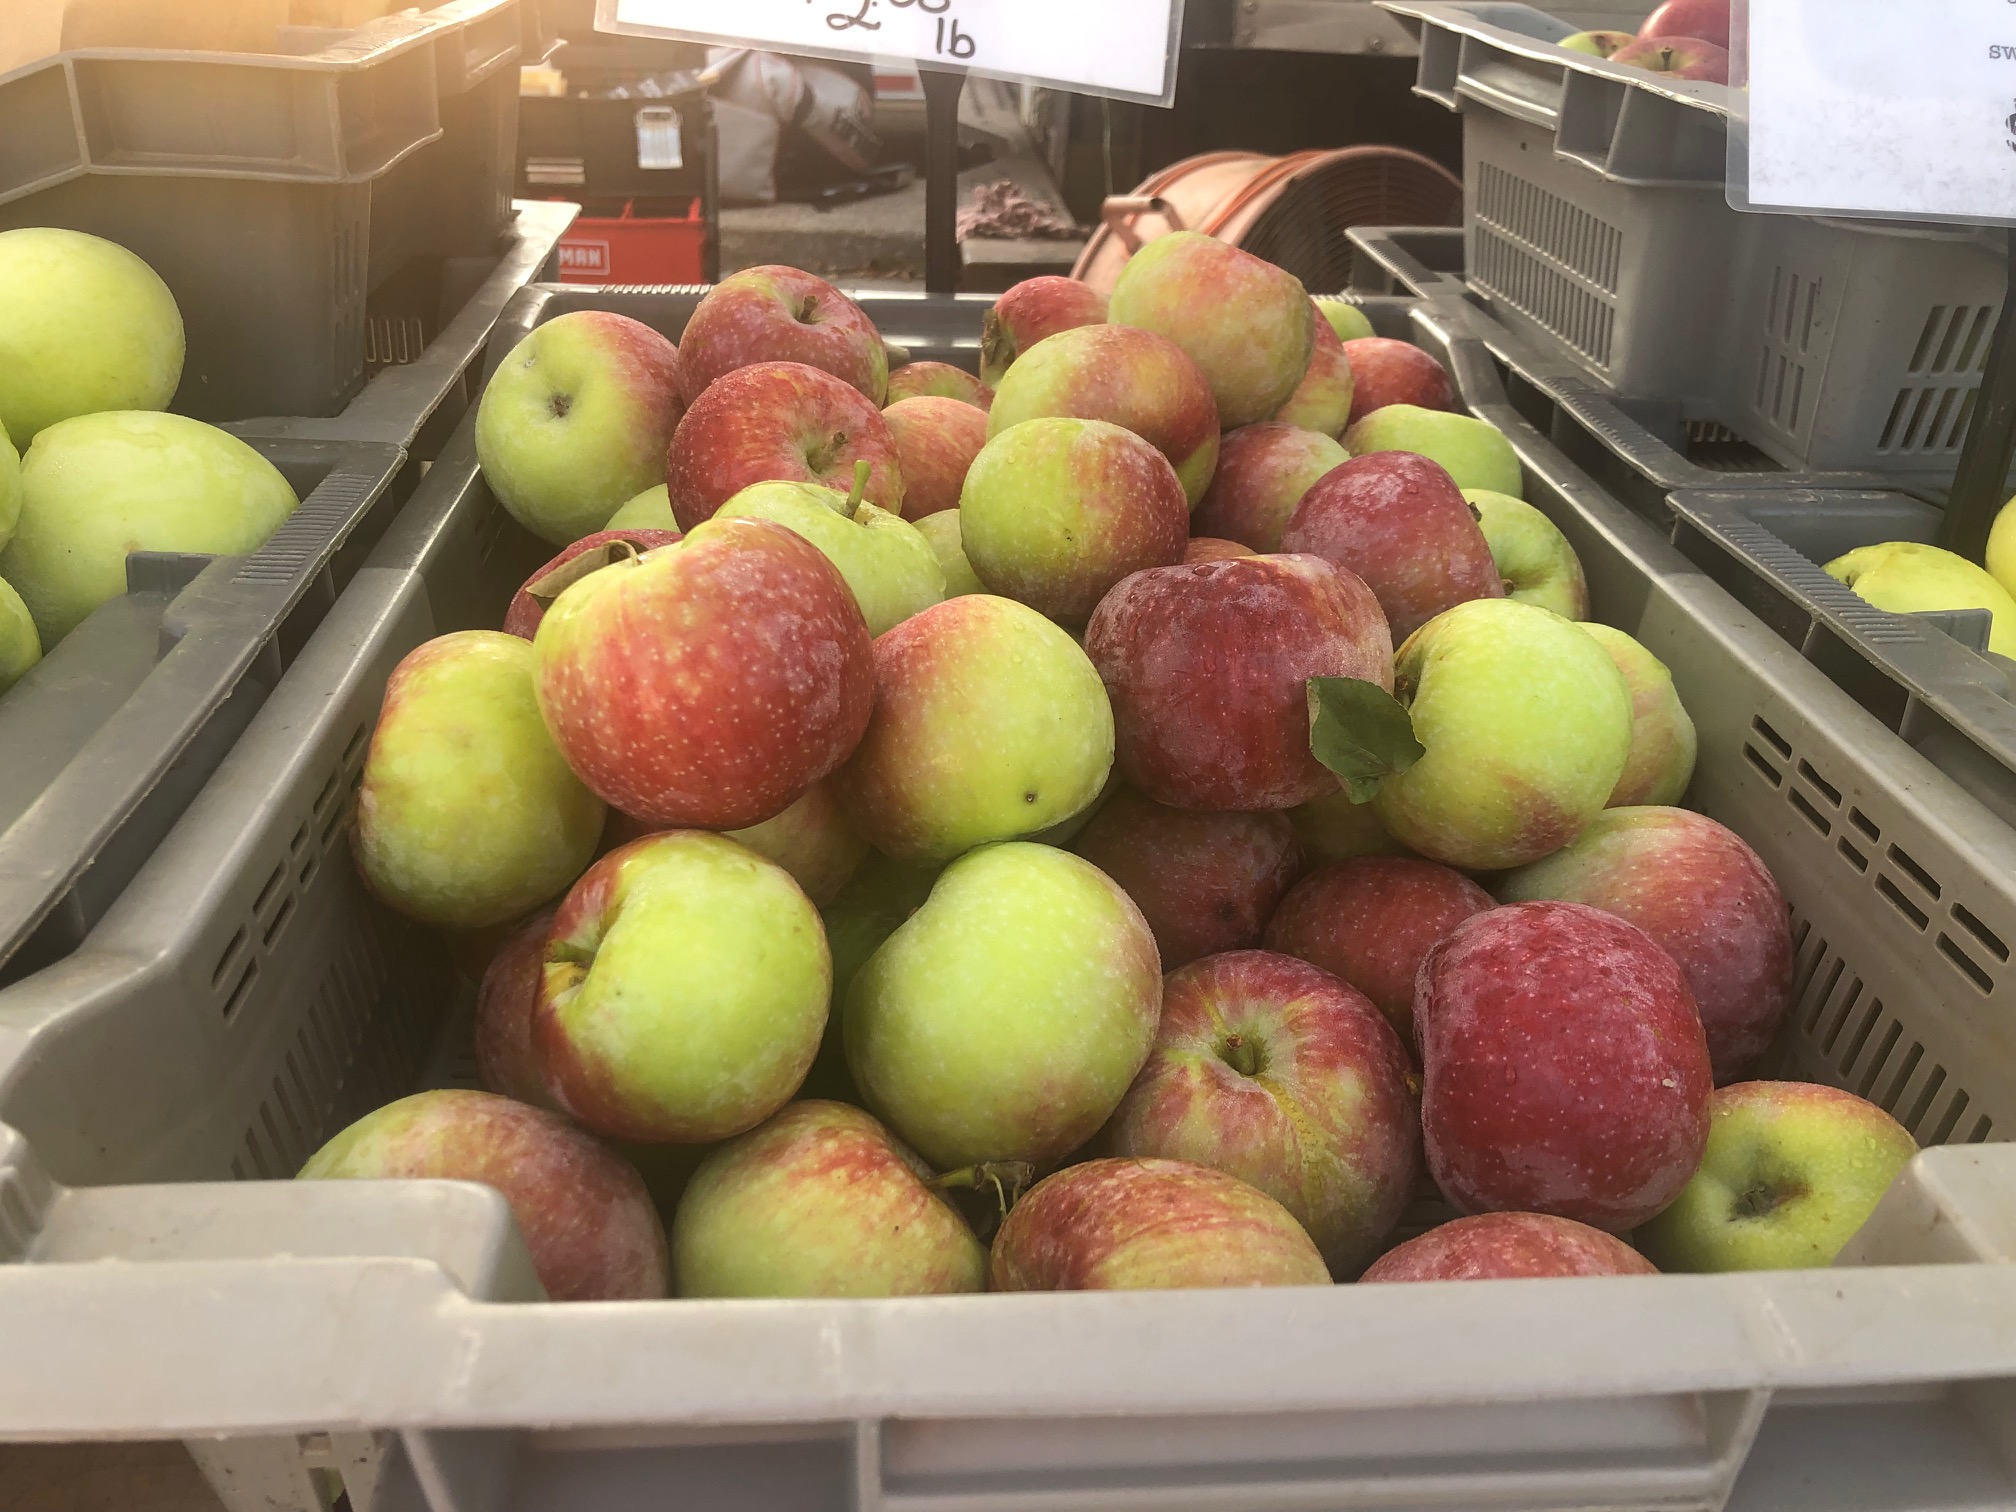 In a rectangular gray container, red apples with a little bit of yellow color are piled up waiting to be sold at the farmers' market. Photo by Alyssa Buckley.